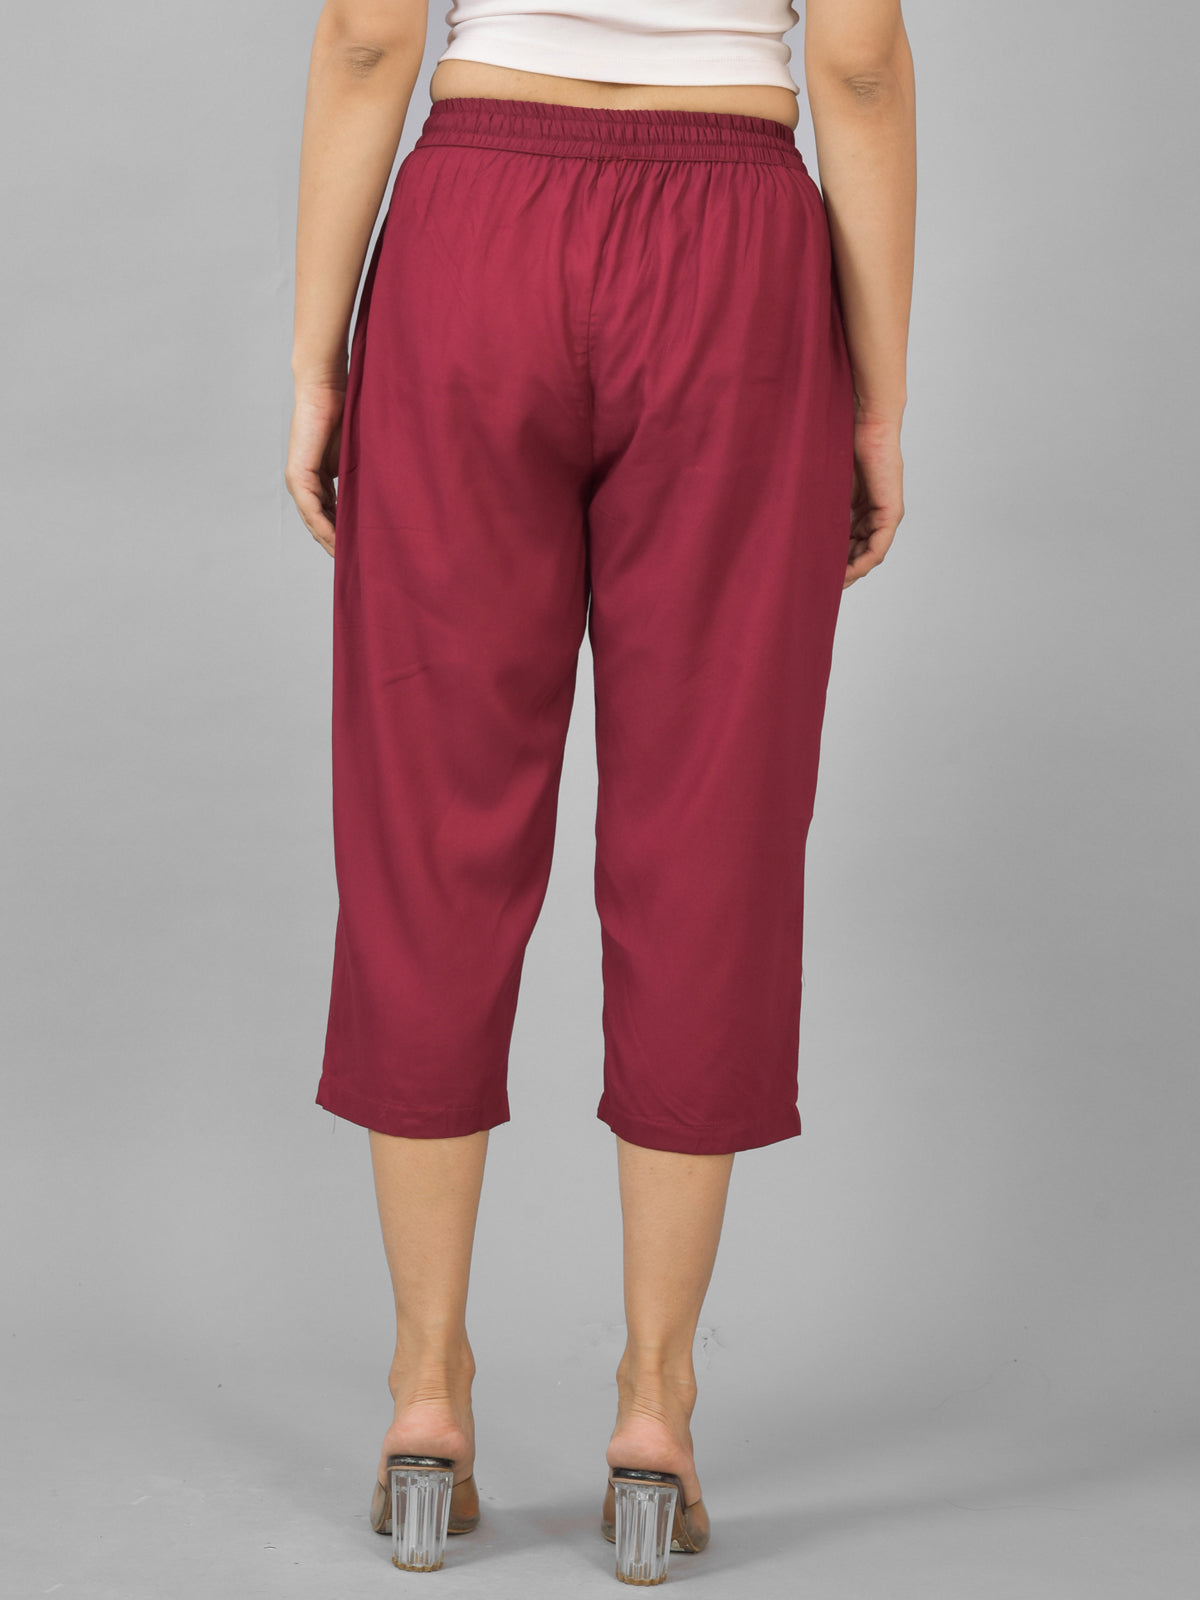 Pack Of 2 Women Teal Blue And Wine Calf Length Rayon Culottes Trouser Combo